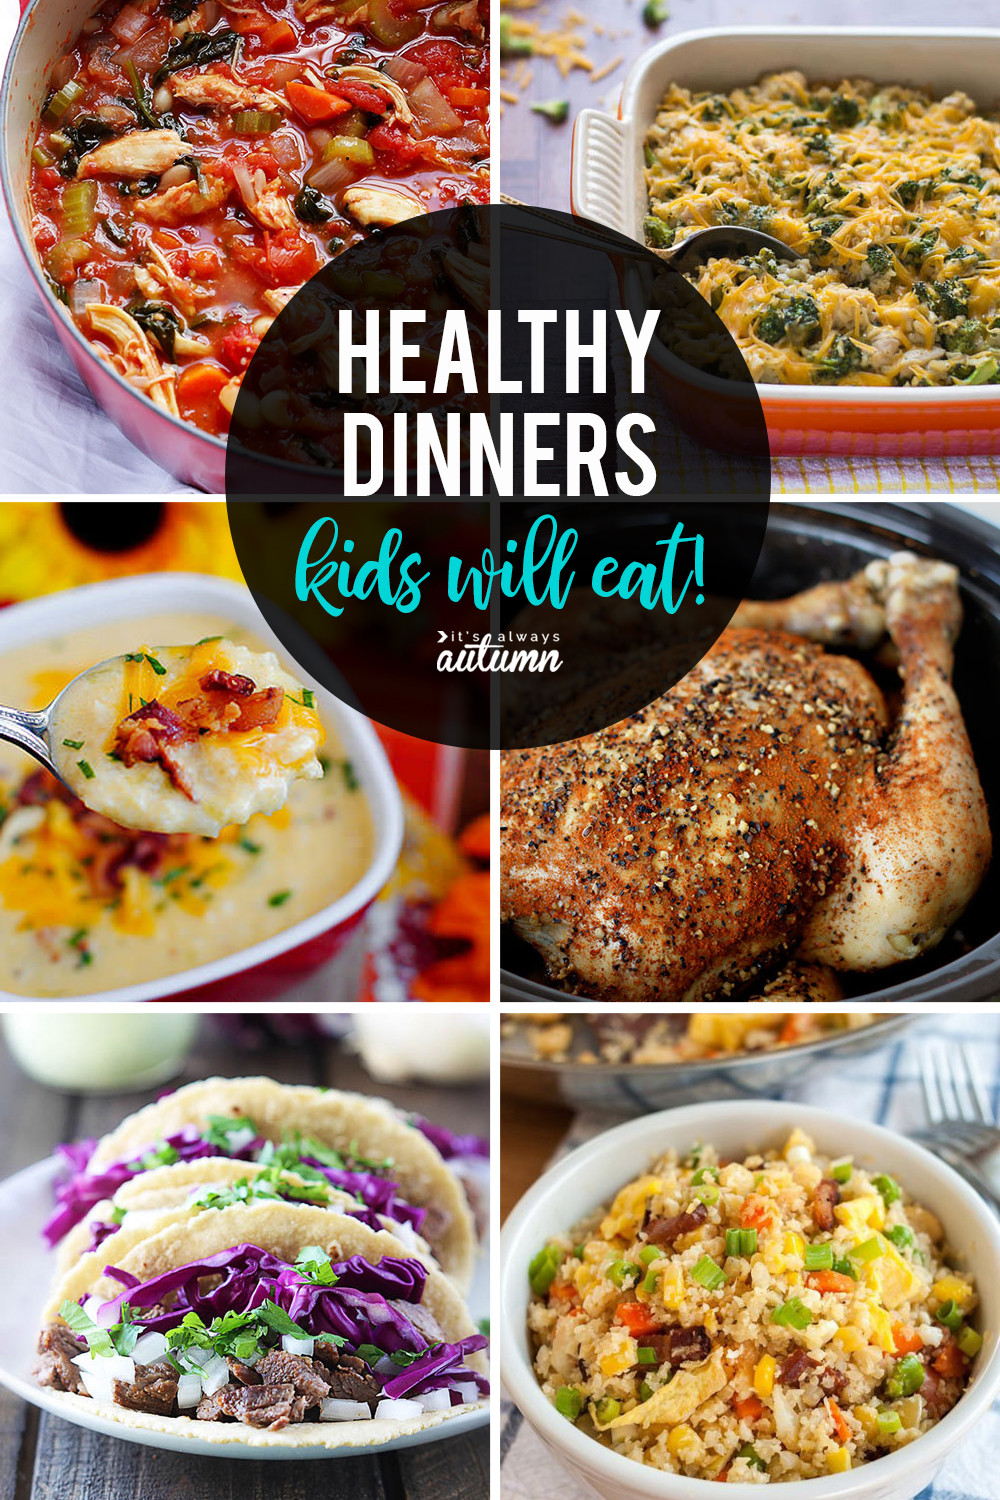 Good Recipes For Kids
 20 healthy easy recipes your kids will actually want to